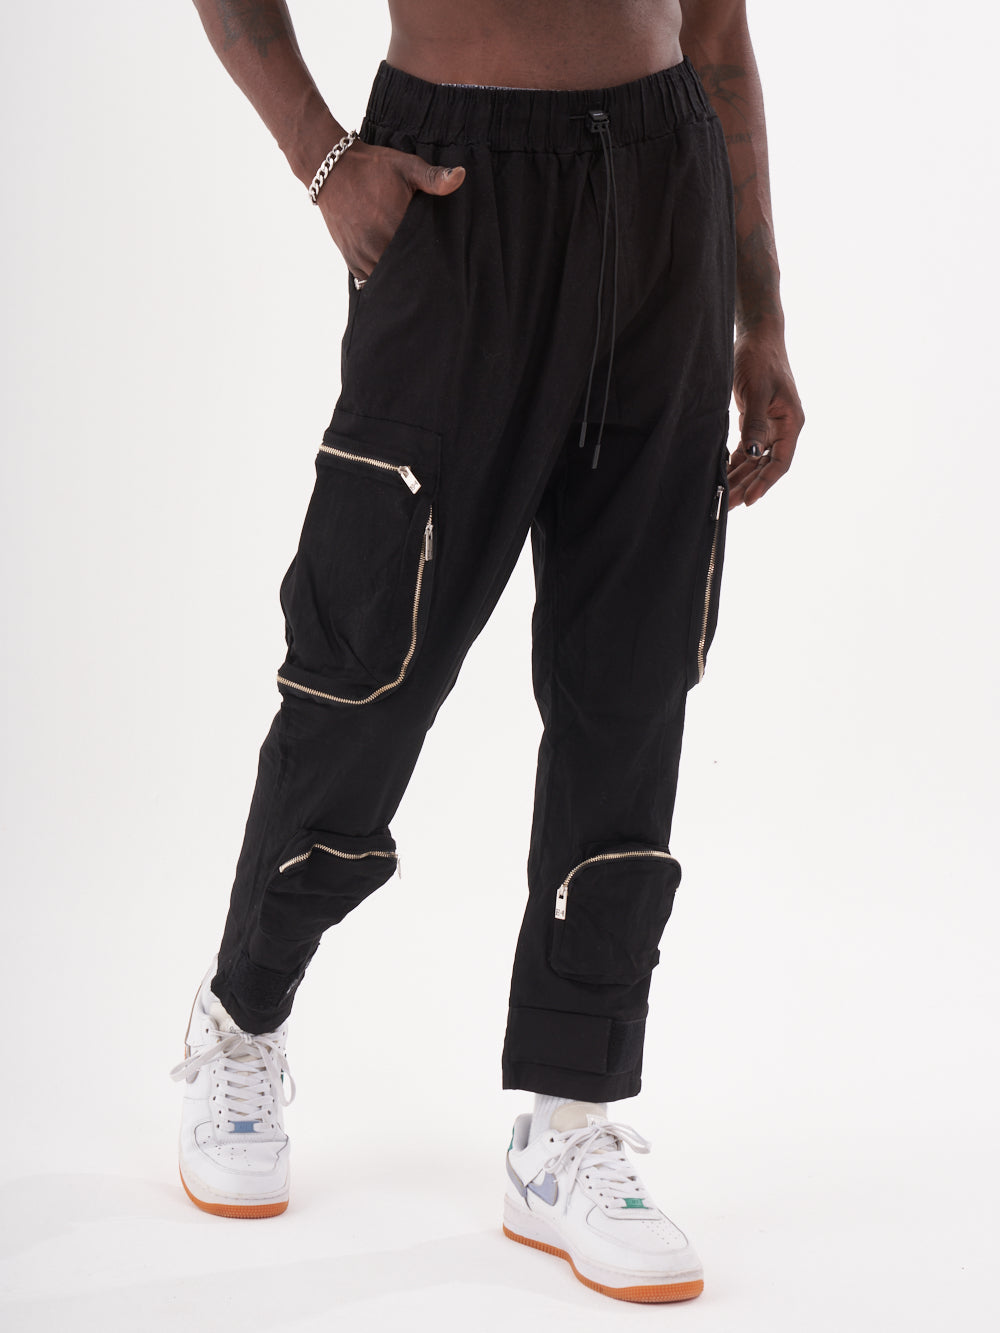 A man wearing Raider joggers with zippers.